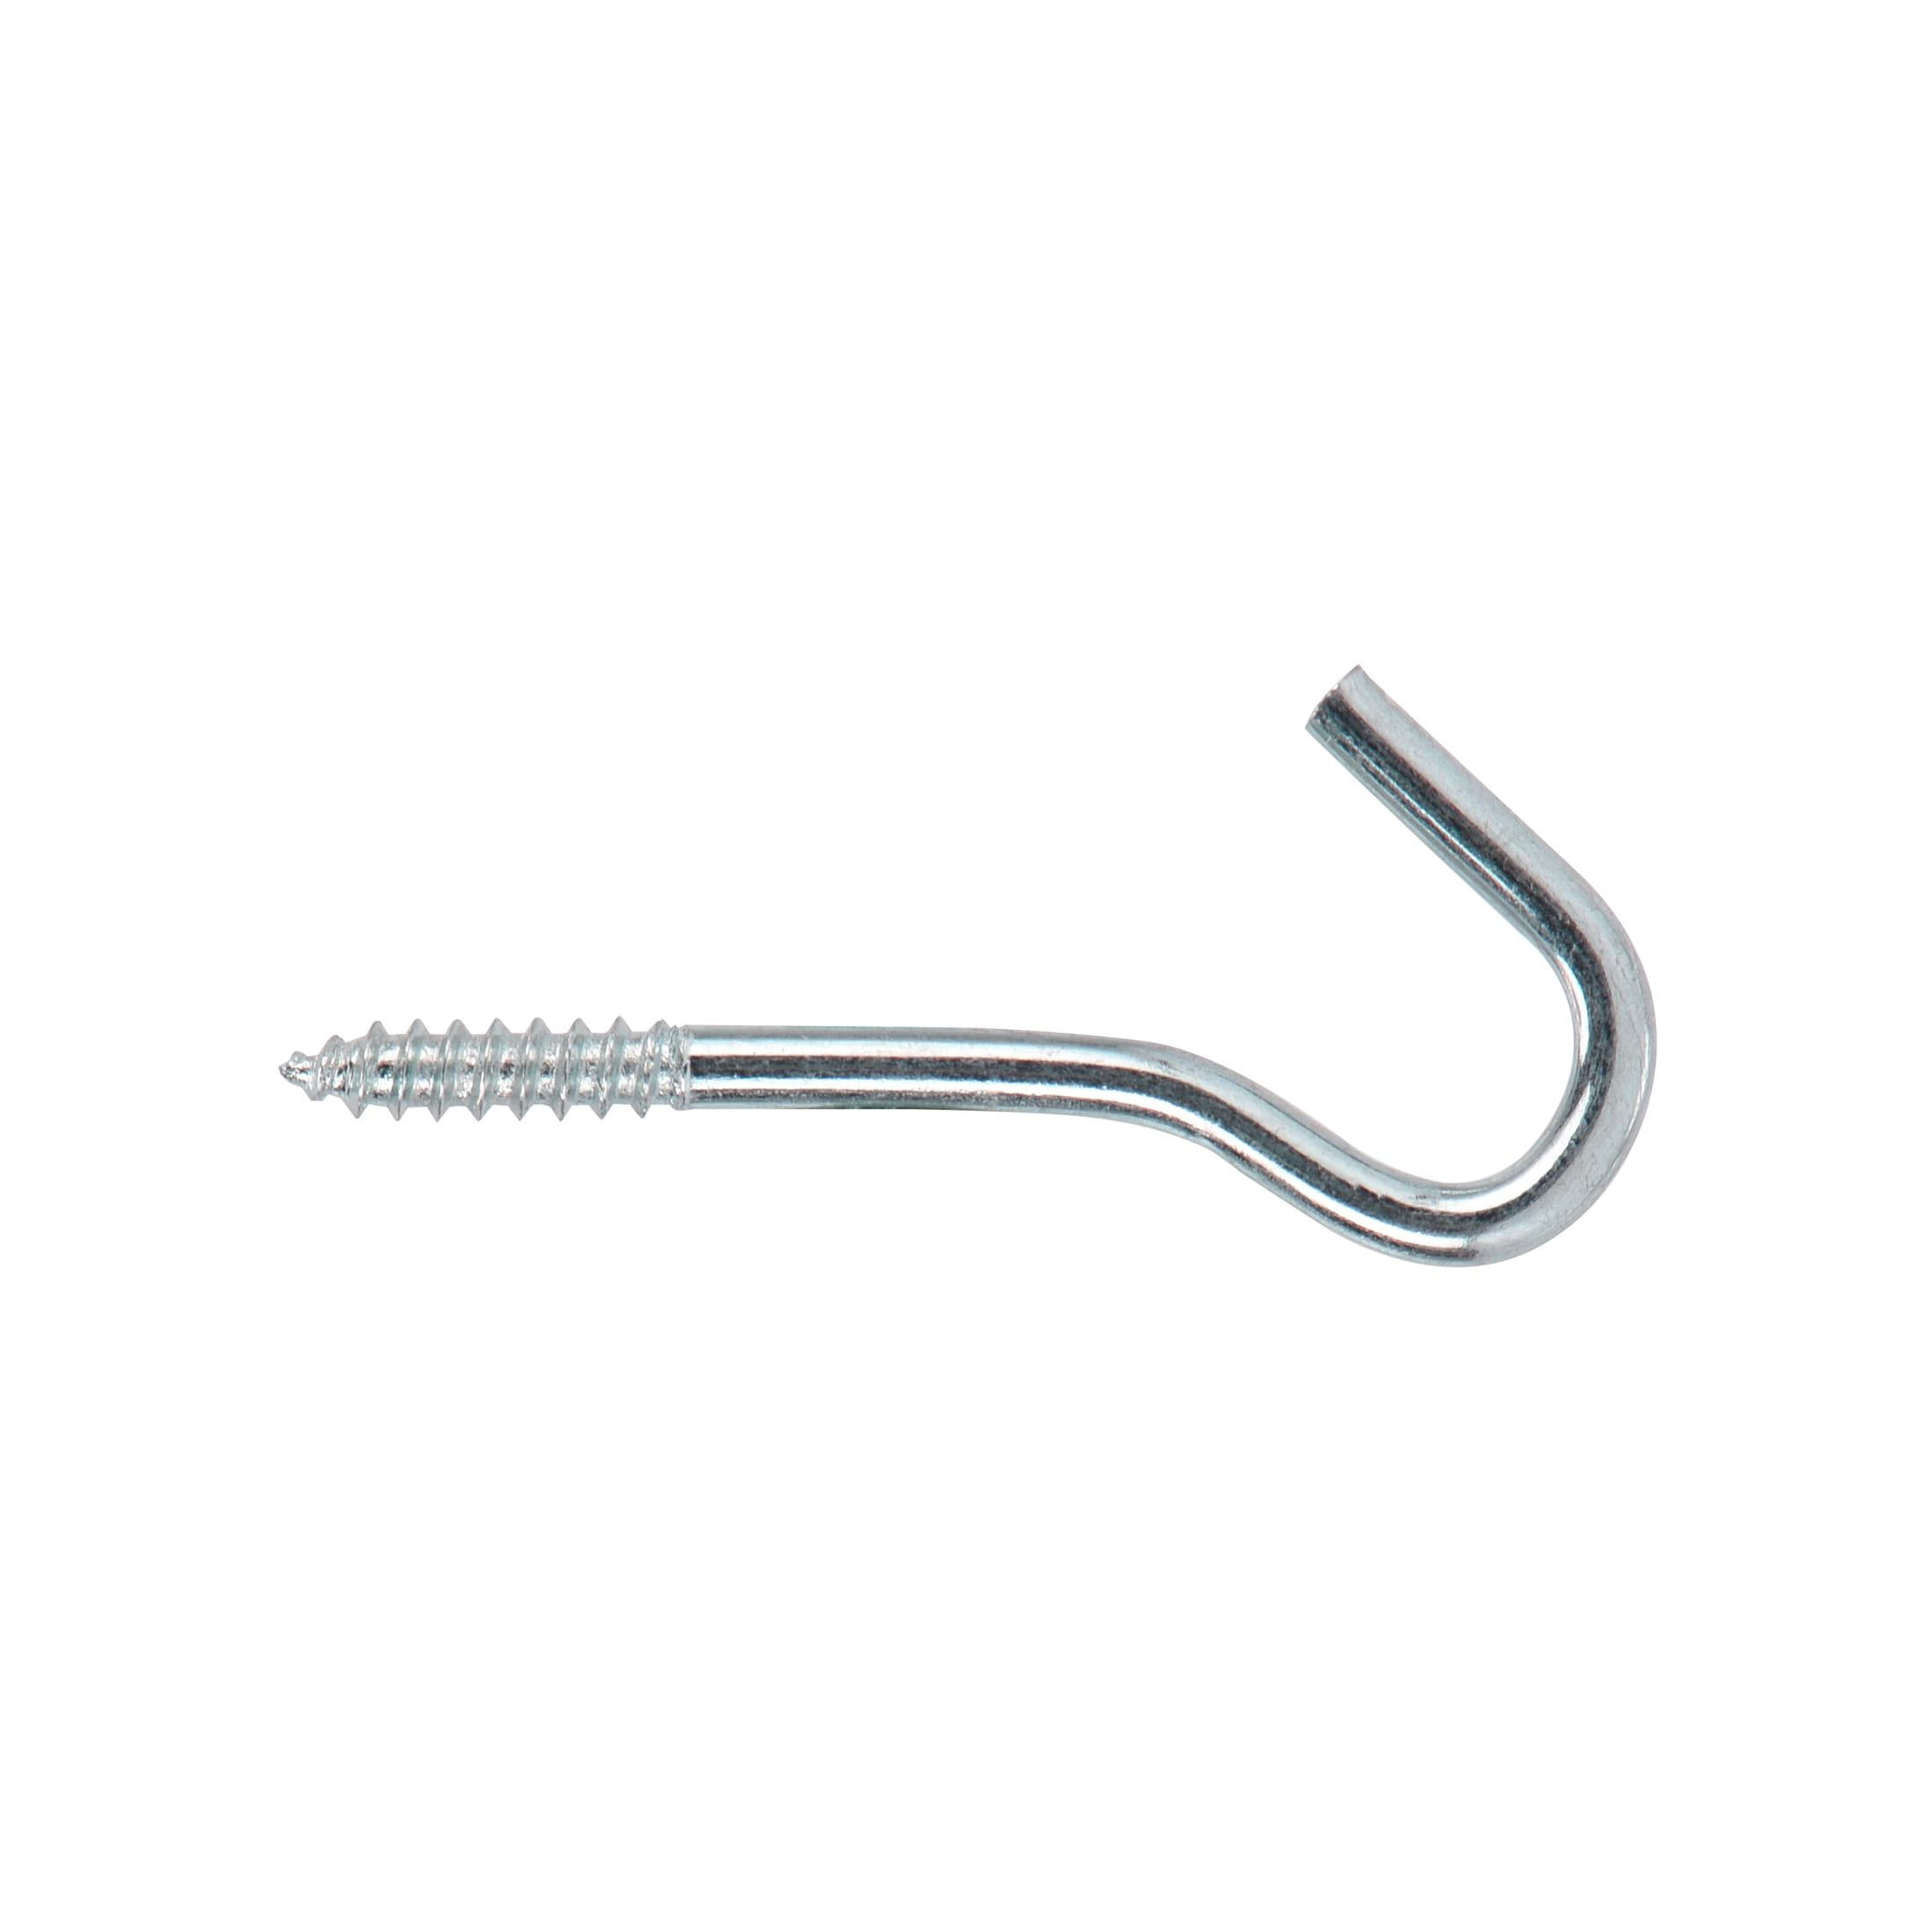 50-Pack of Zinc-Plated Screw Hooks 40mm (1-5/8in) Size – Strong Metal – The  Kit Brands